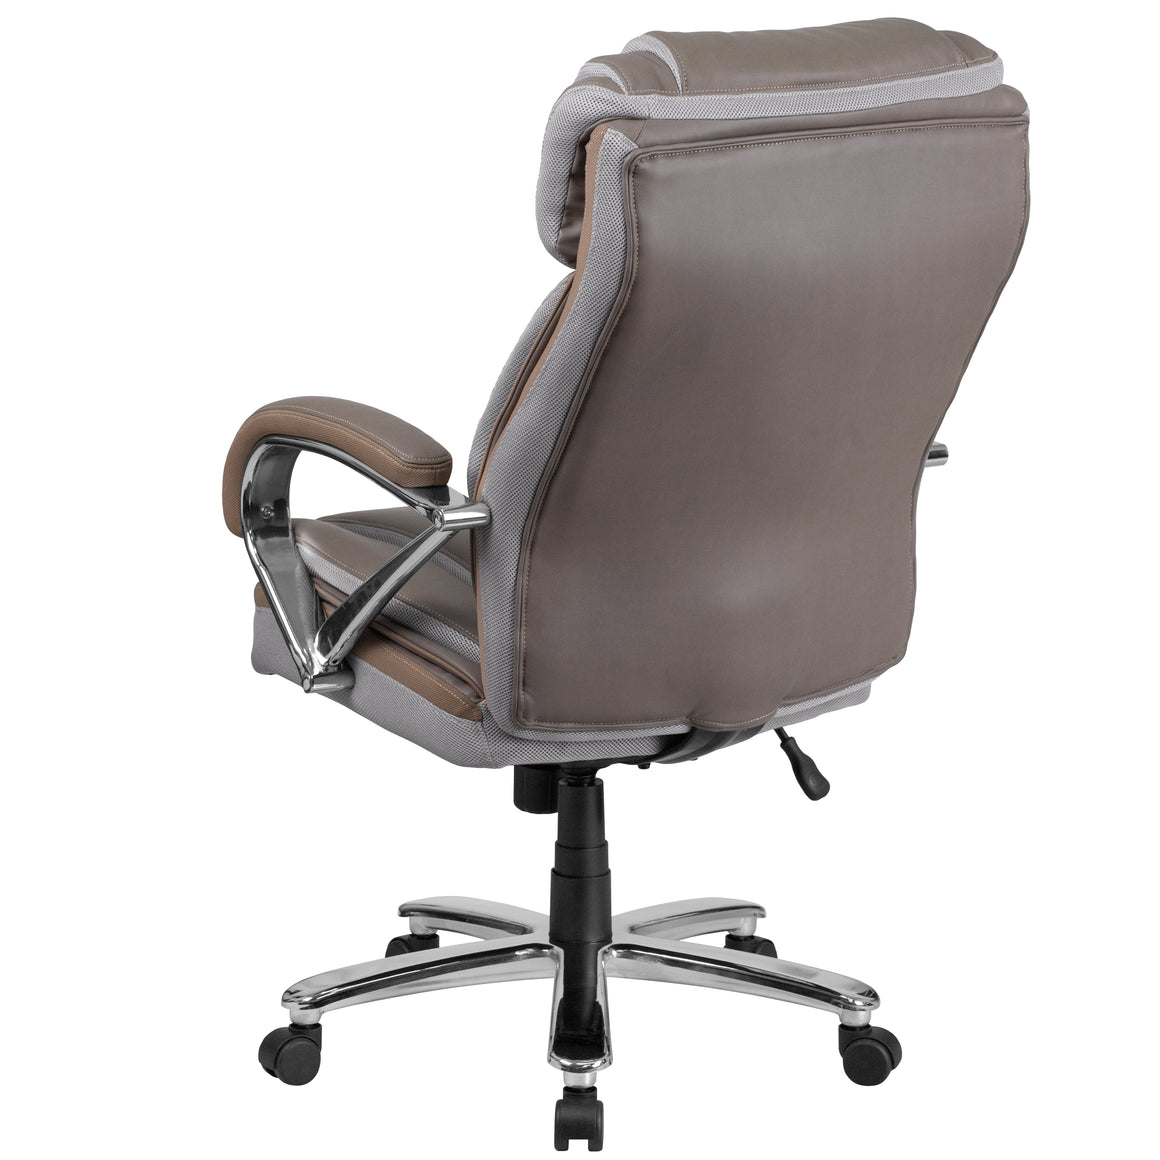 Hercules 500 LB. Capacity Big & Tall Taupe Leather Office Chair - Man Cave Boutique